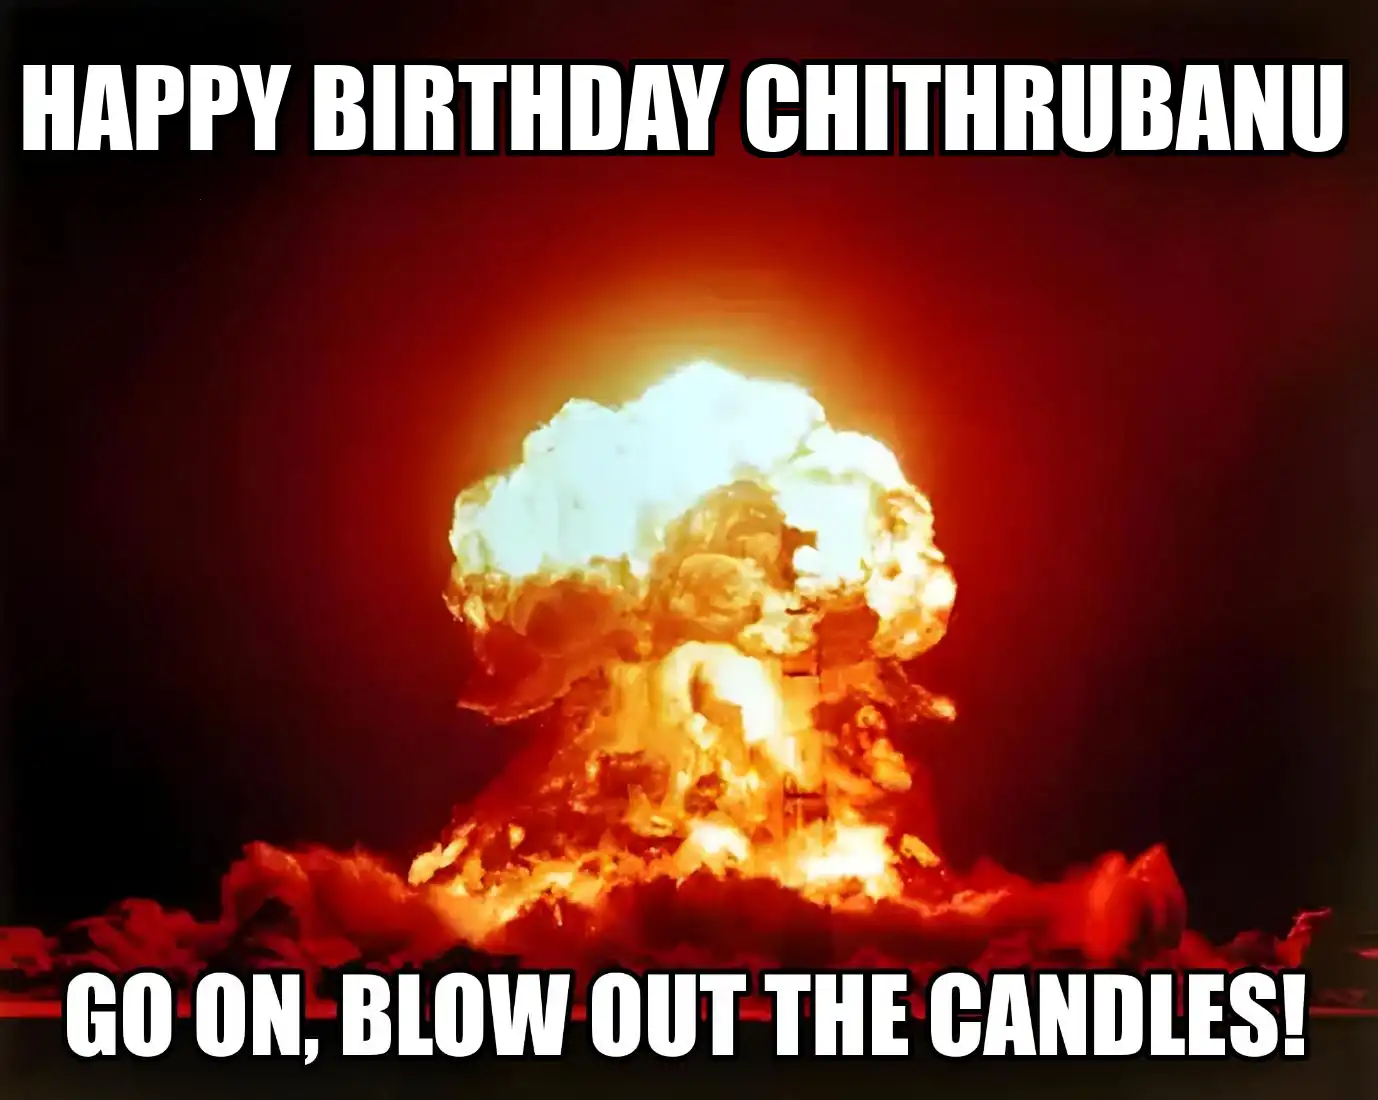 Happy Birthday Chithrubanu Go On Blow Out The Candles Meme